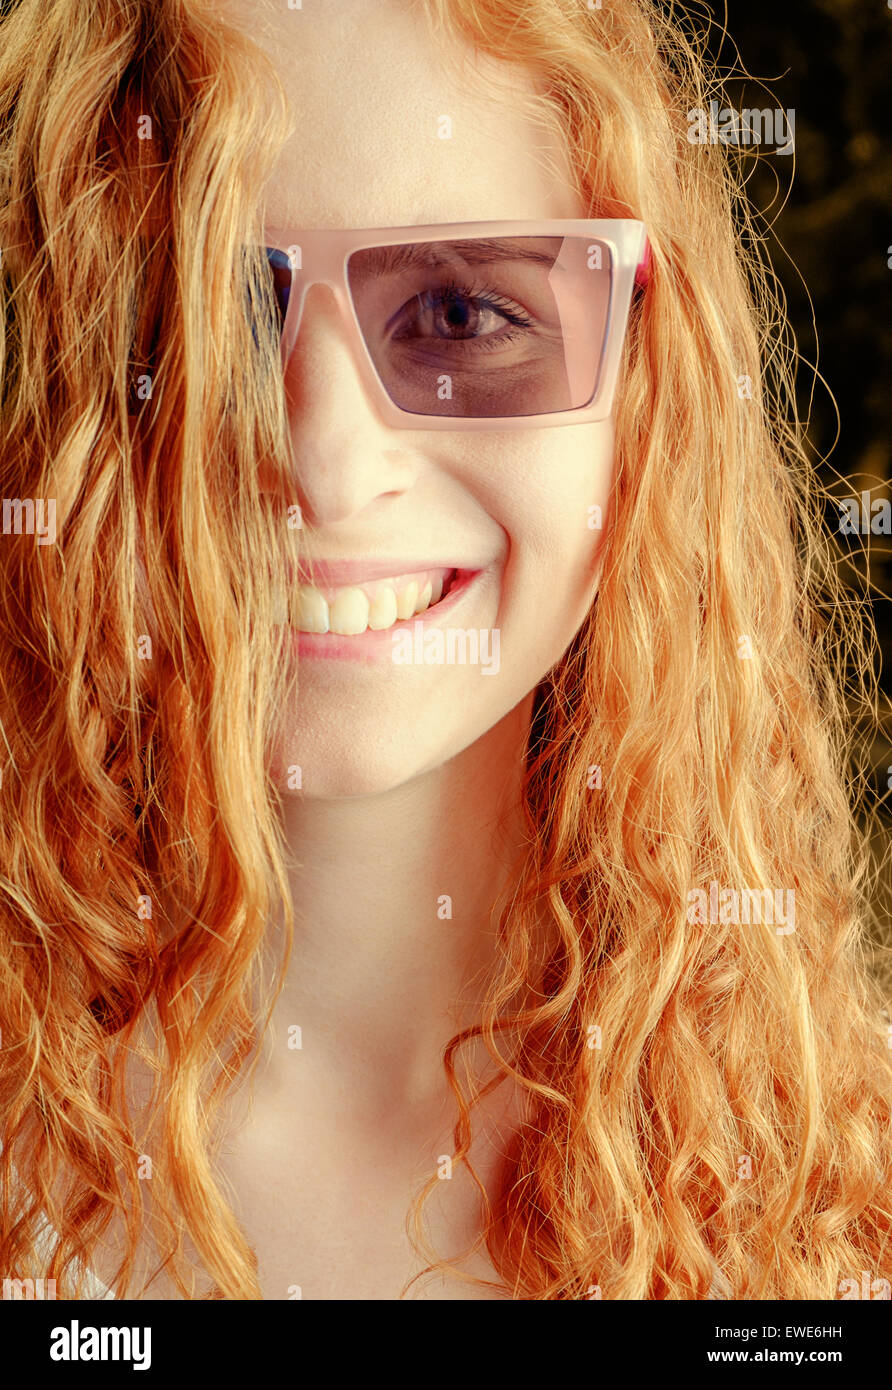 Summer portrait beautiful redhead young woman wearing sunglasses. Summertime happyness Stock Photo